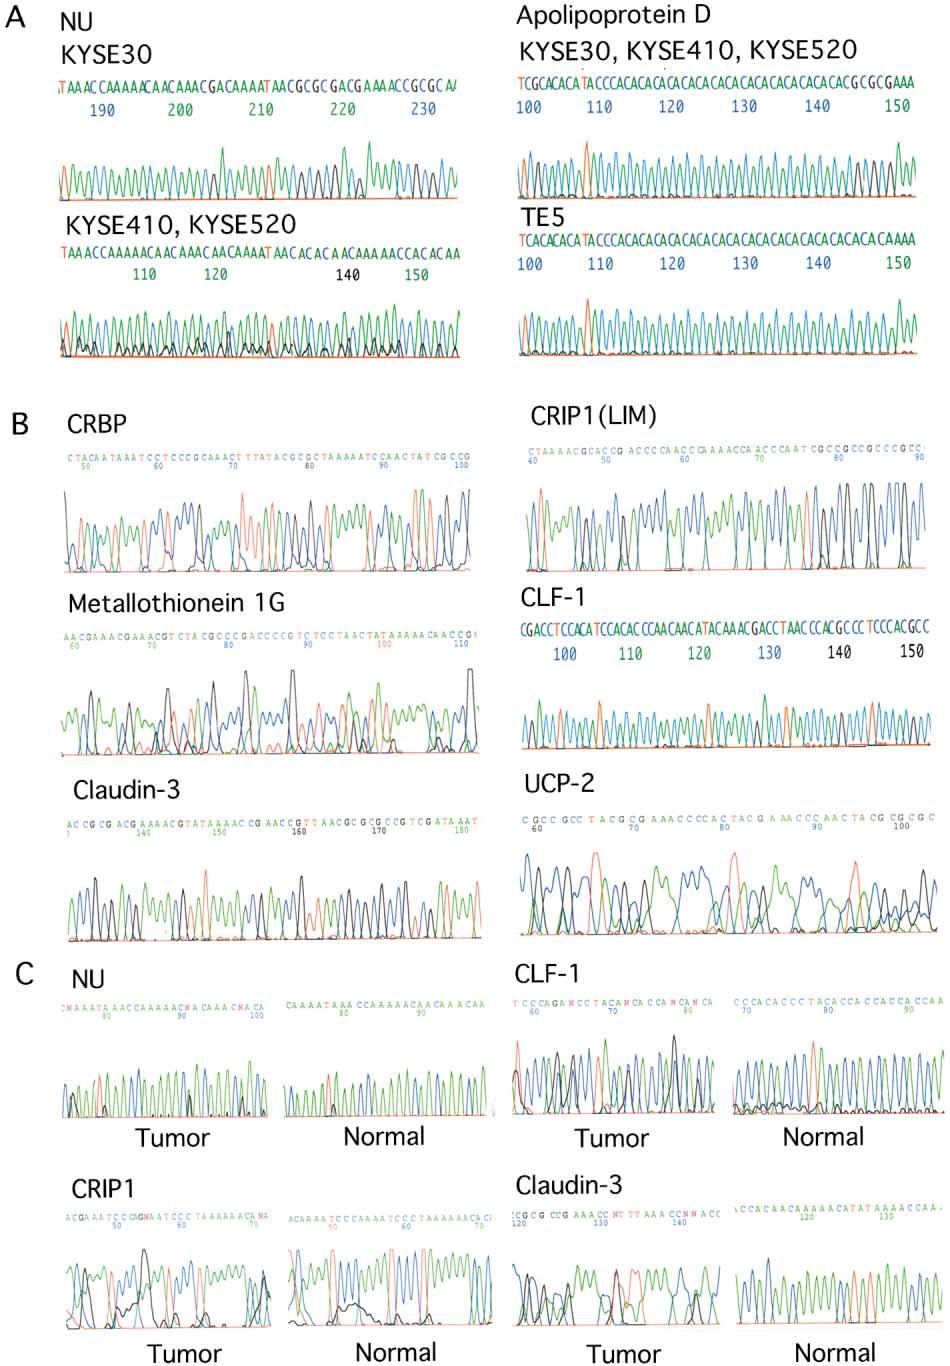 Figure 3. Promoter methylation of representative candidate suppressor genes A: Direct sequence of NU and Apo D promoters.